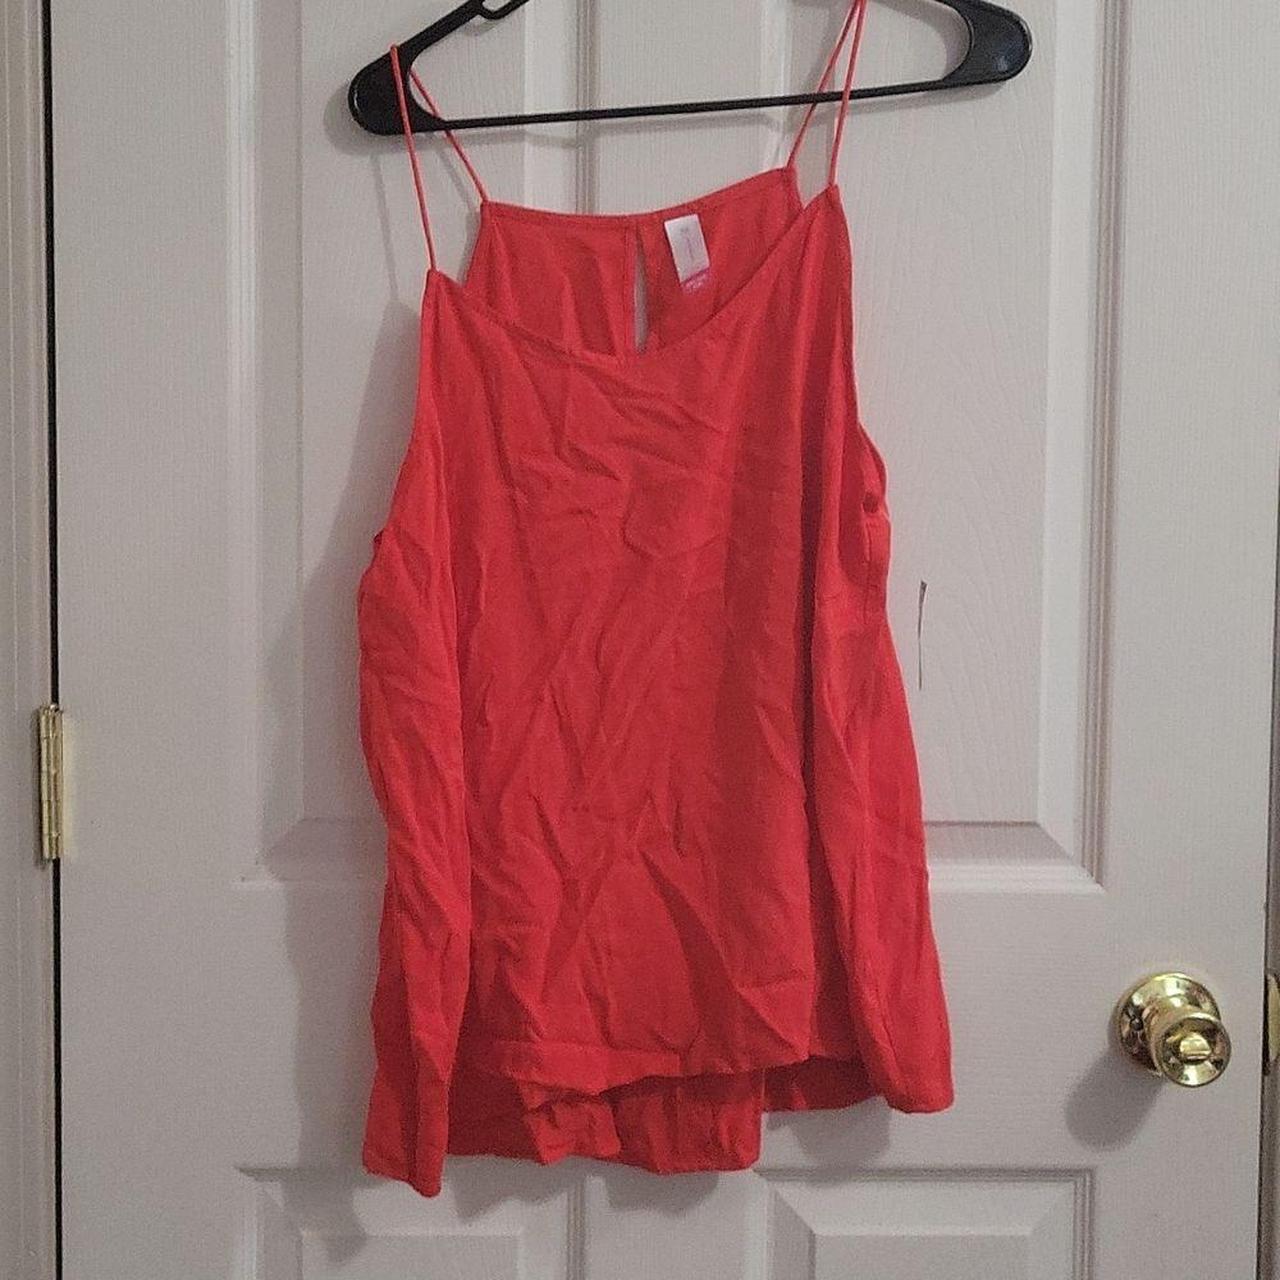 Product Image 1 - Brand: 	No Boundaries
Color: 	Red
Style: 	Tank